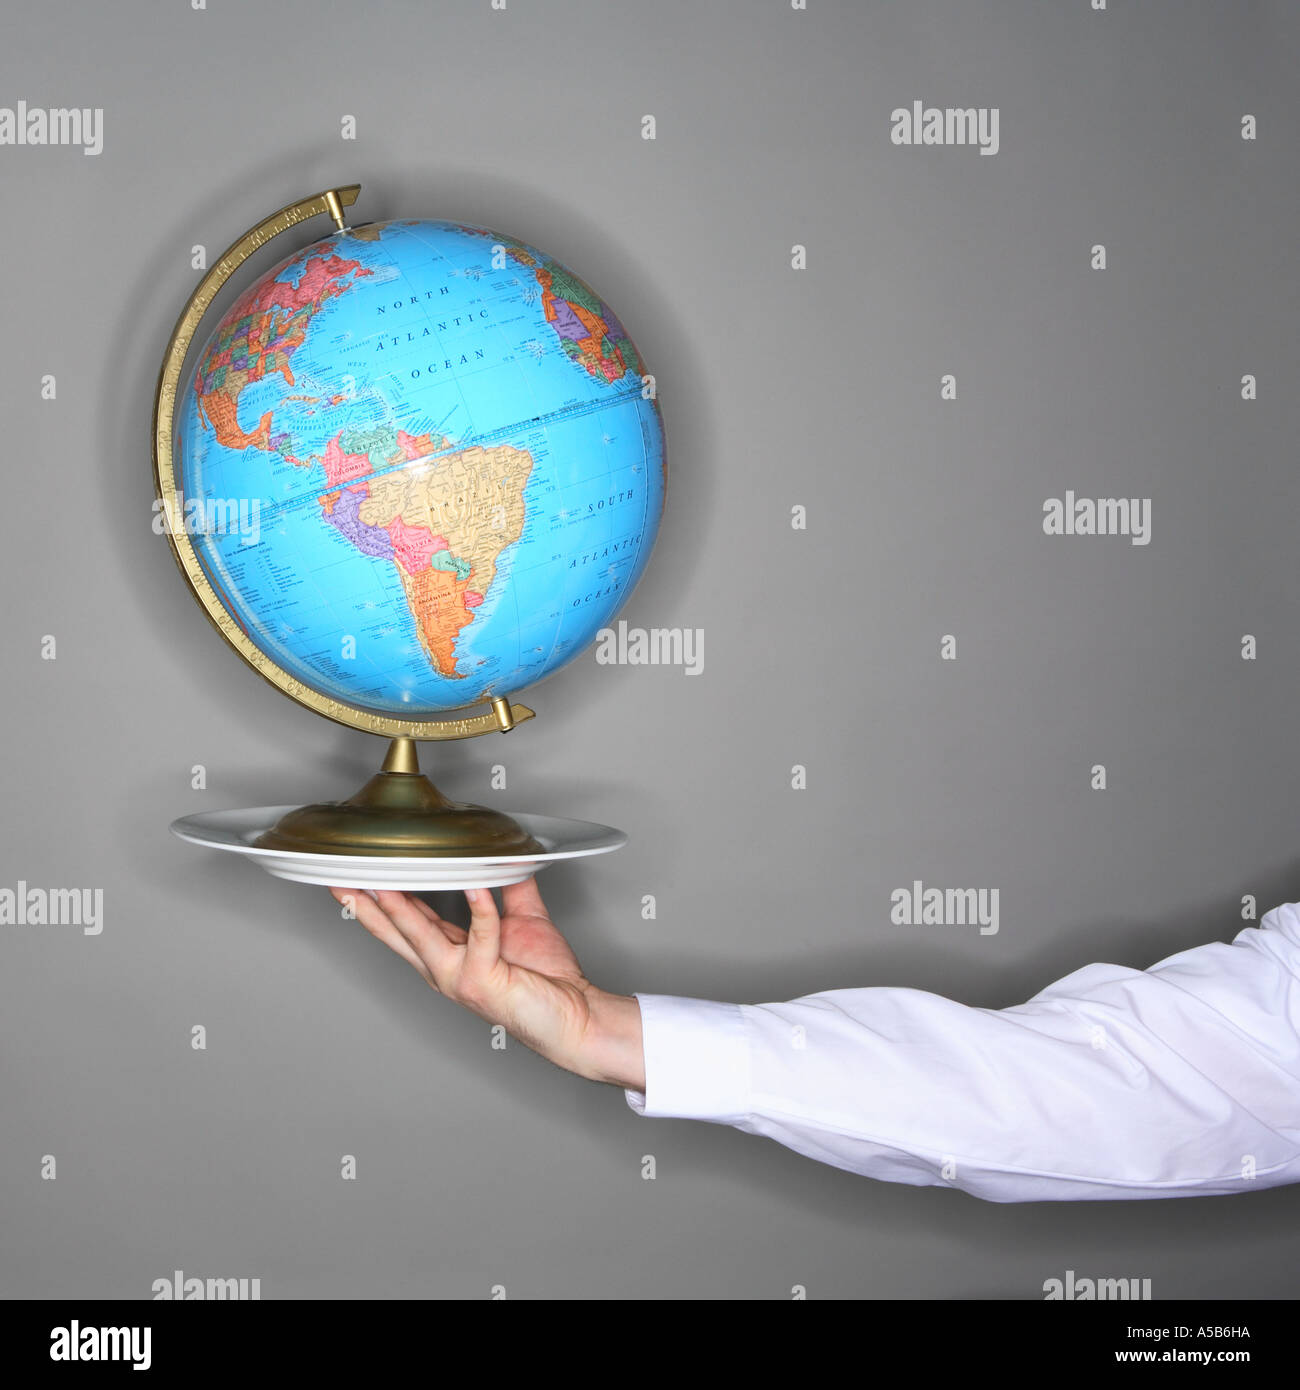 Arm holding globe on a plate Stock Photo